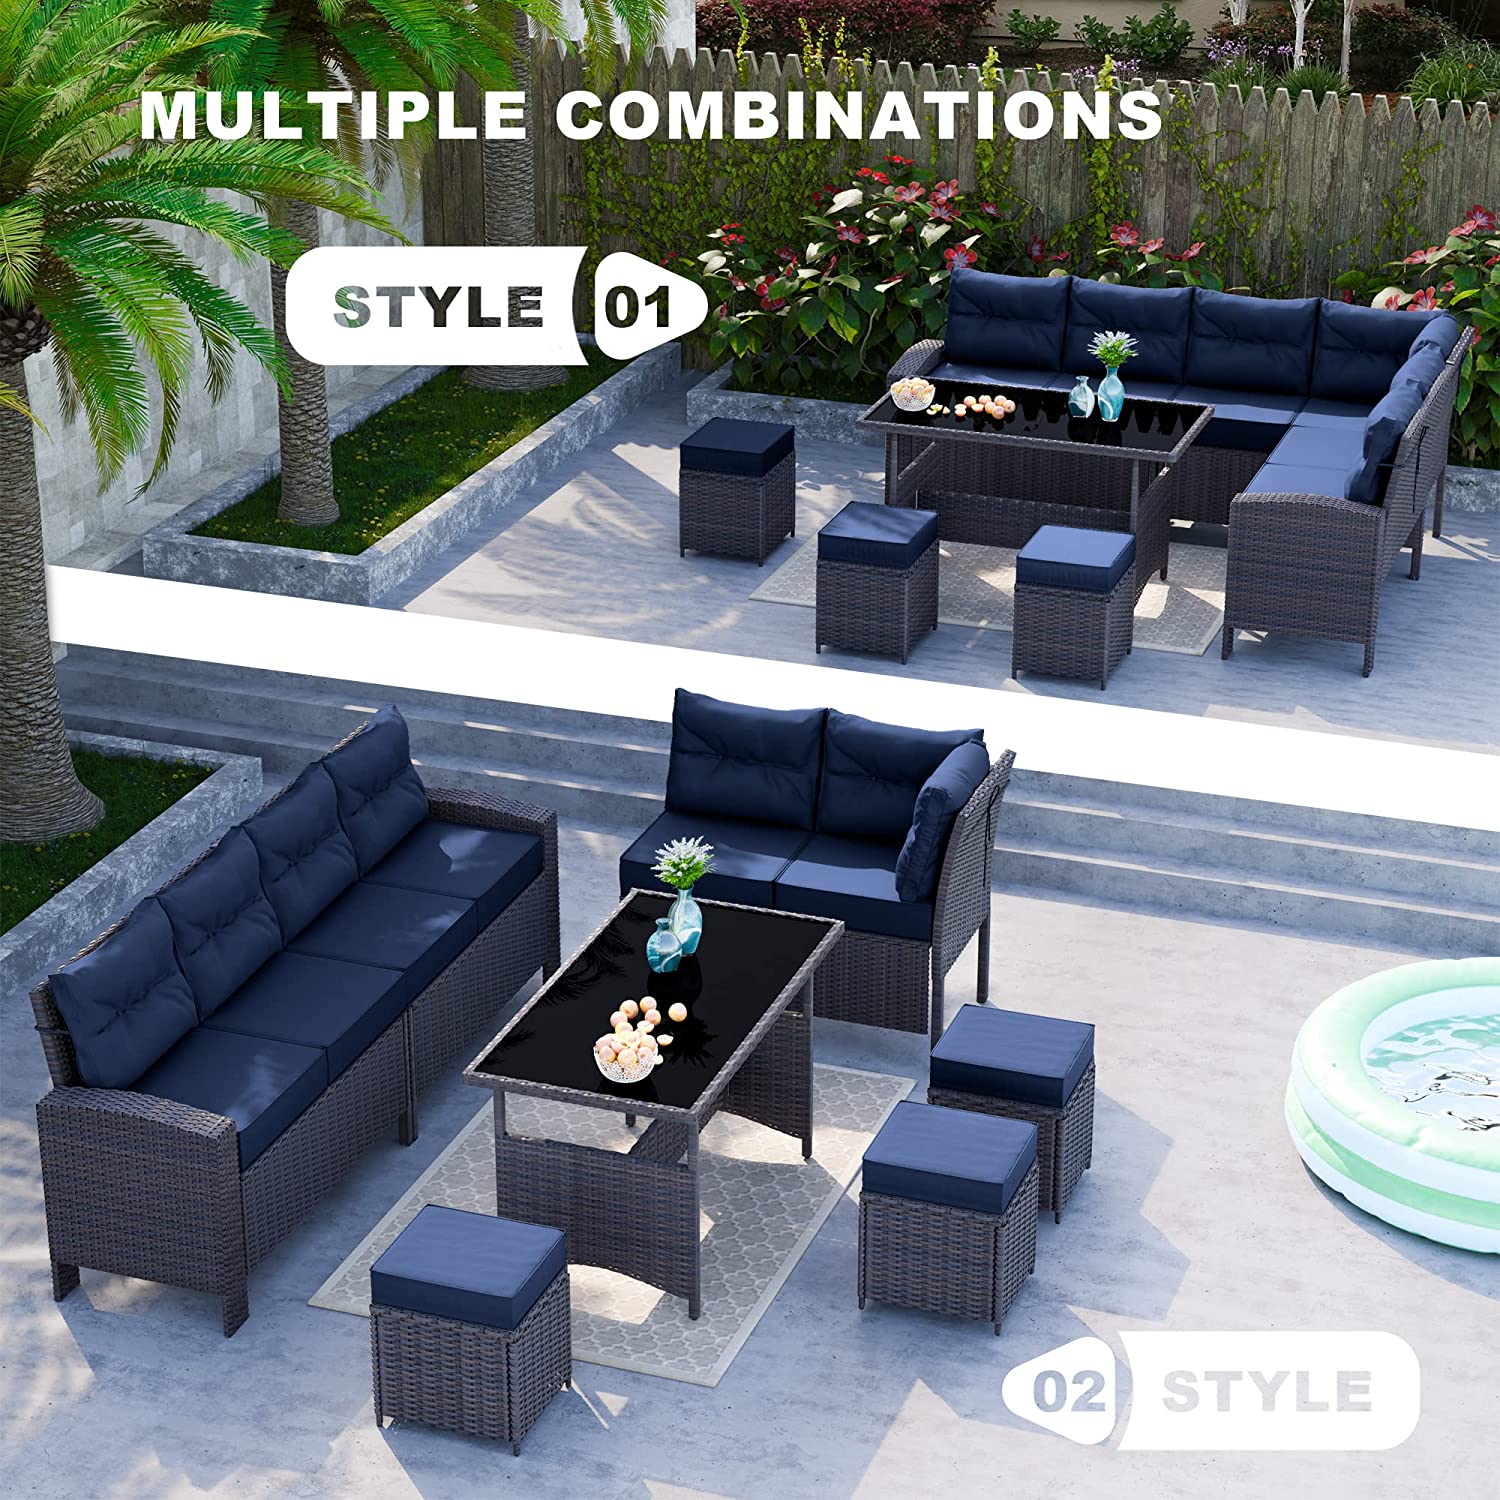 Kullavik 7 Pieces Outdoor Patio Furniture Set, All-Weather Patio Outdoor Dining Conversation Sectional Set with Coffee Table, Wicker Sofas, Ottomans, Removable Cushions,Navy Blue - image 5 of 7